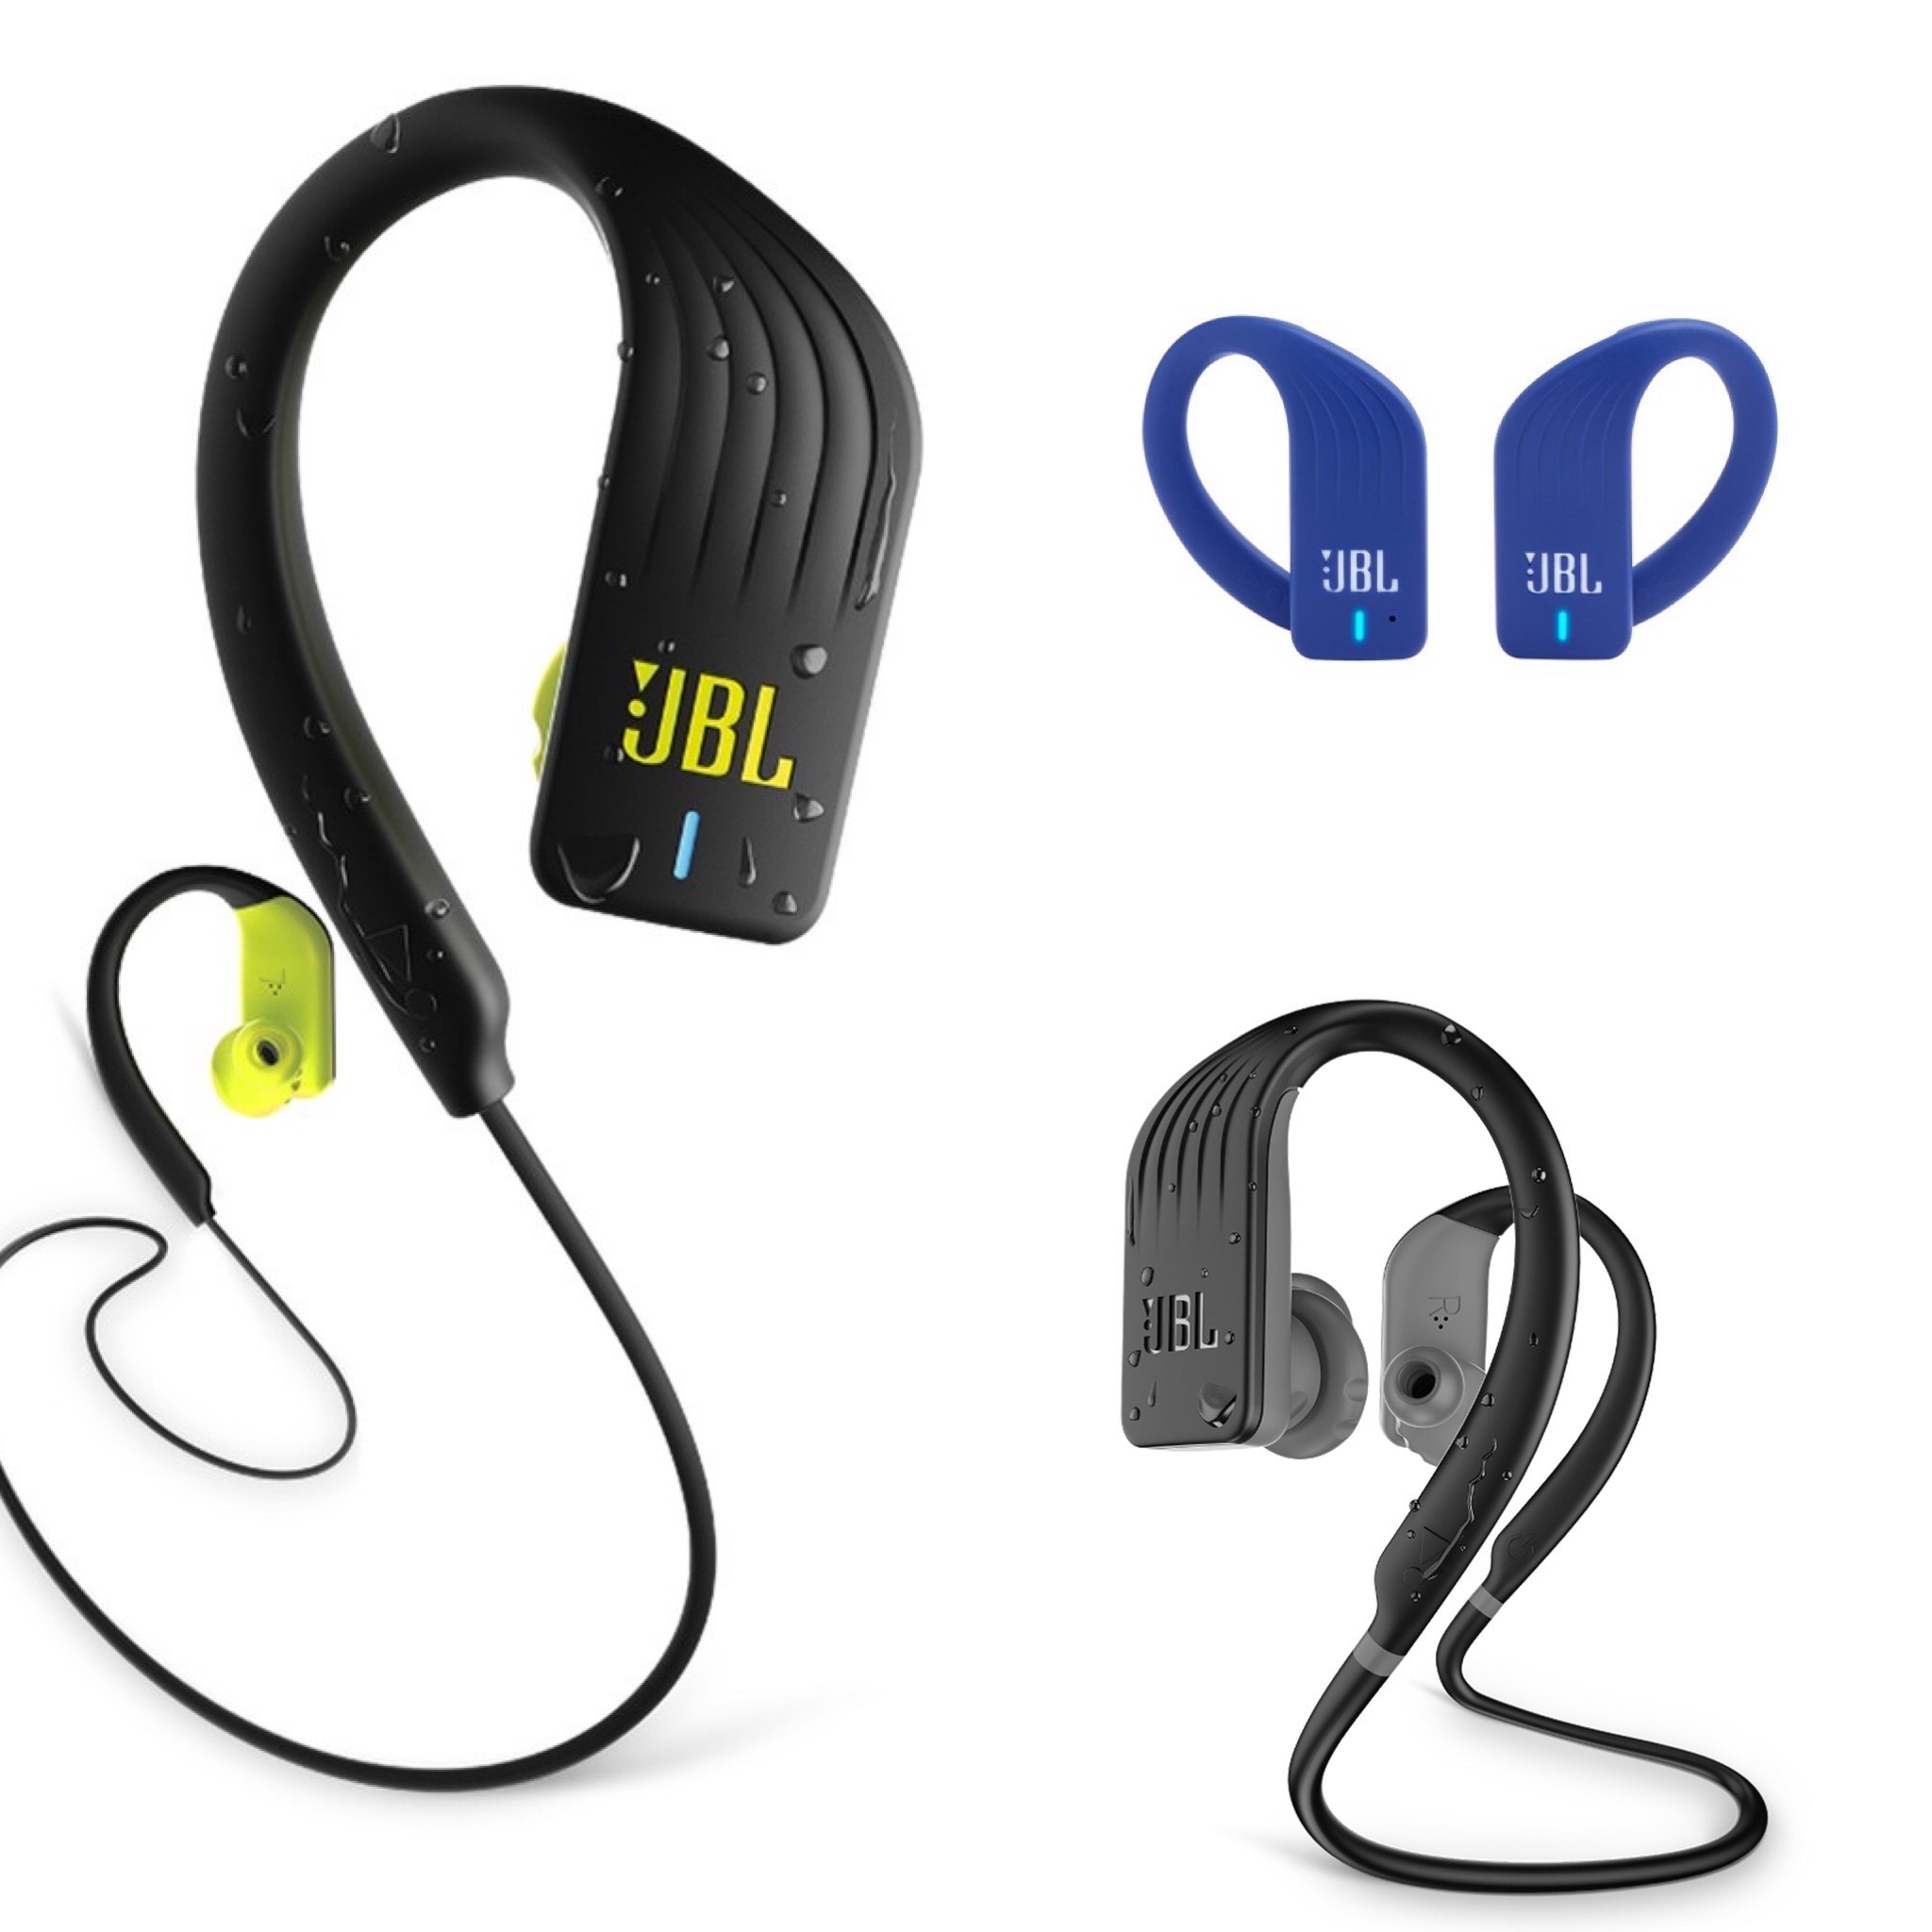 Microbe Størrelse Necklet Surprise your dad this Father's Day with JBL earphones on Shopee - Just  another lifestyle news